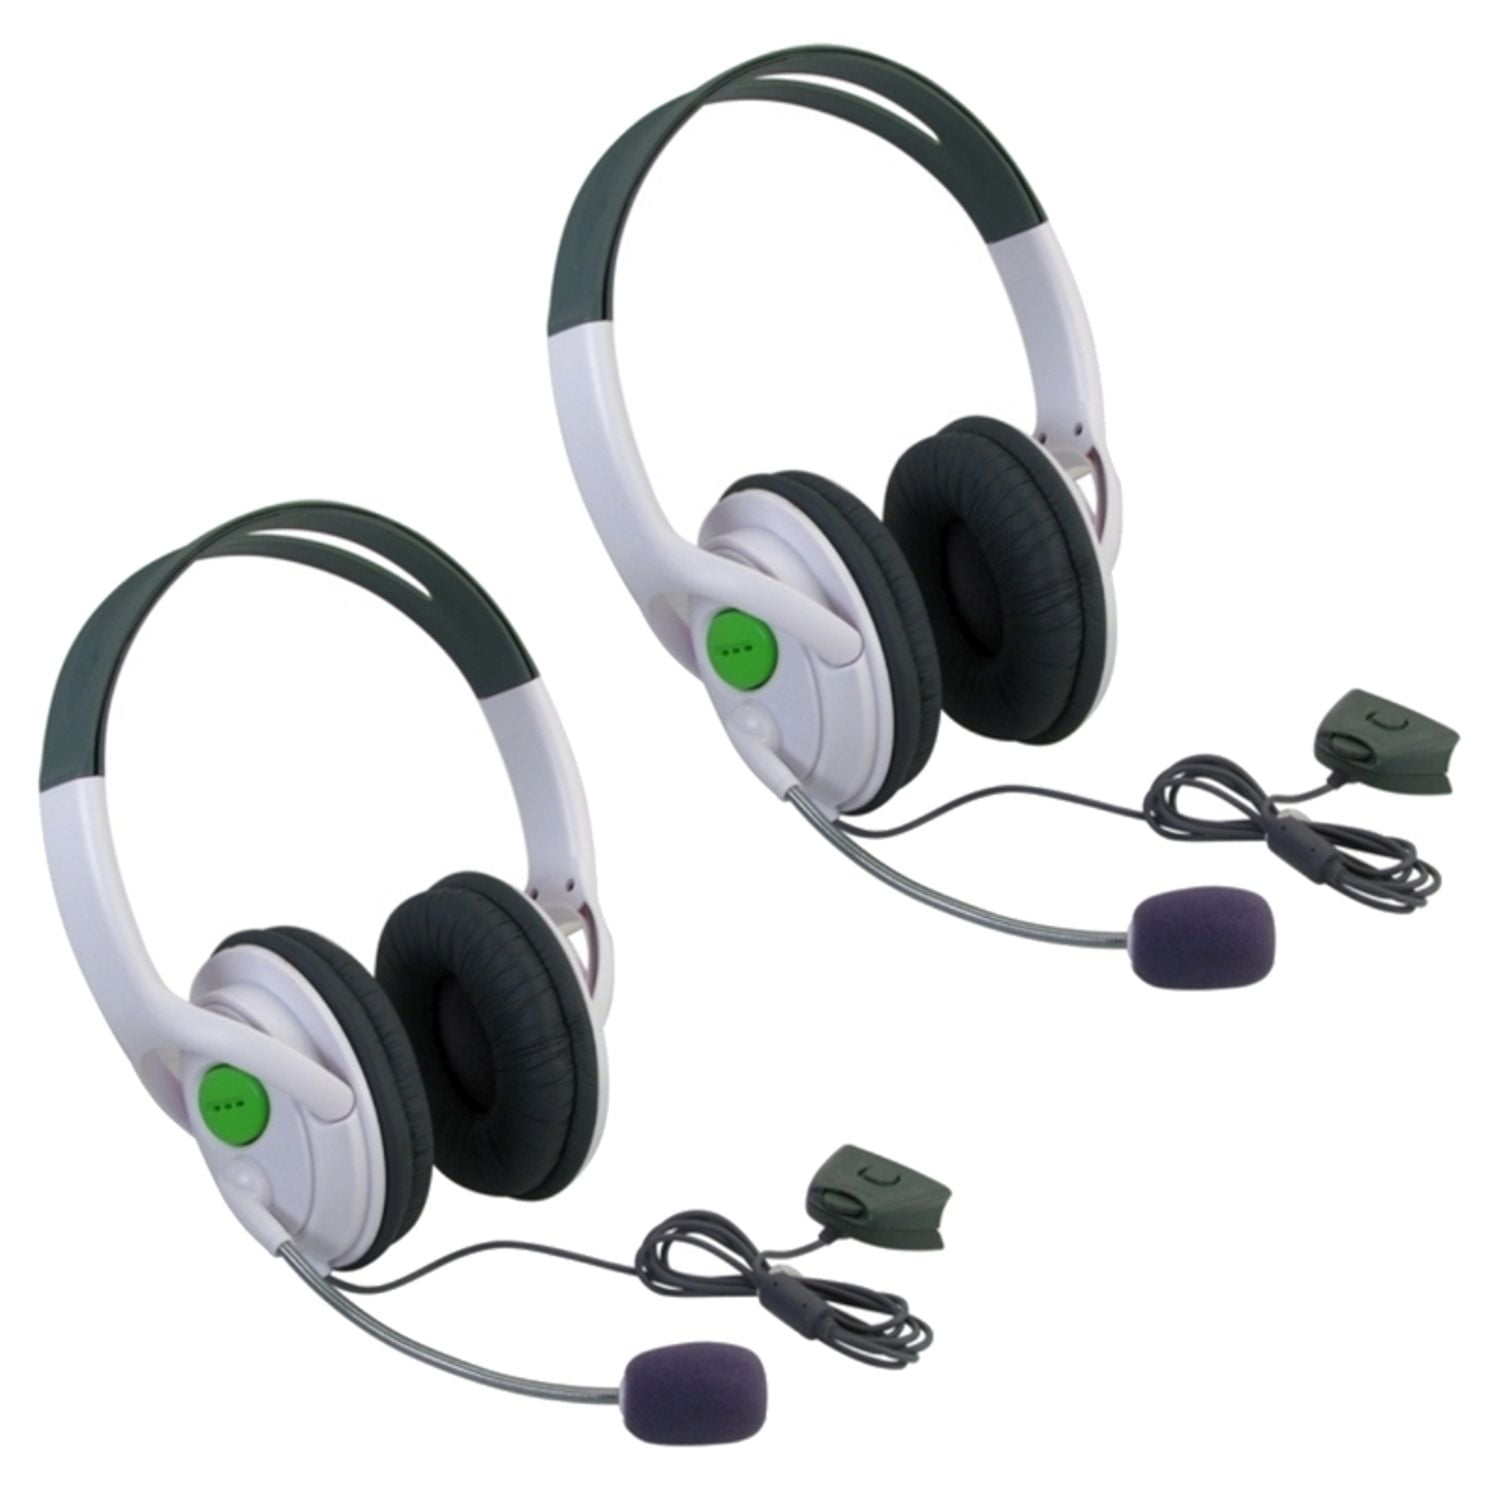 Insten 2 Packs Live Gaming Headset Headphone with Microphone Mic for XBOX 360 Slim / XBOX 360